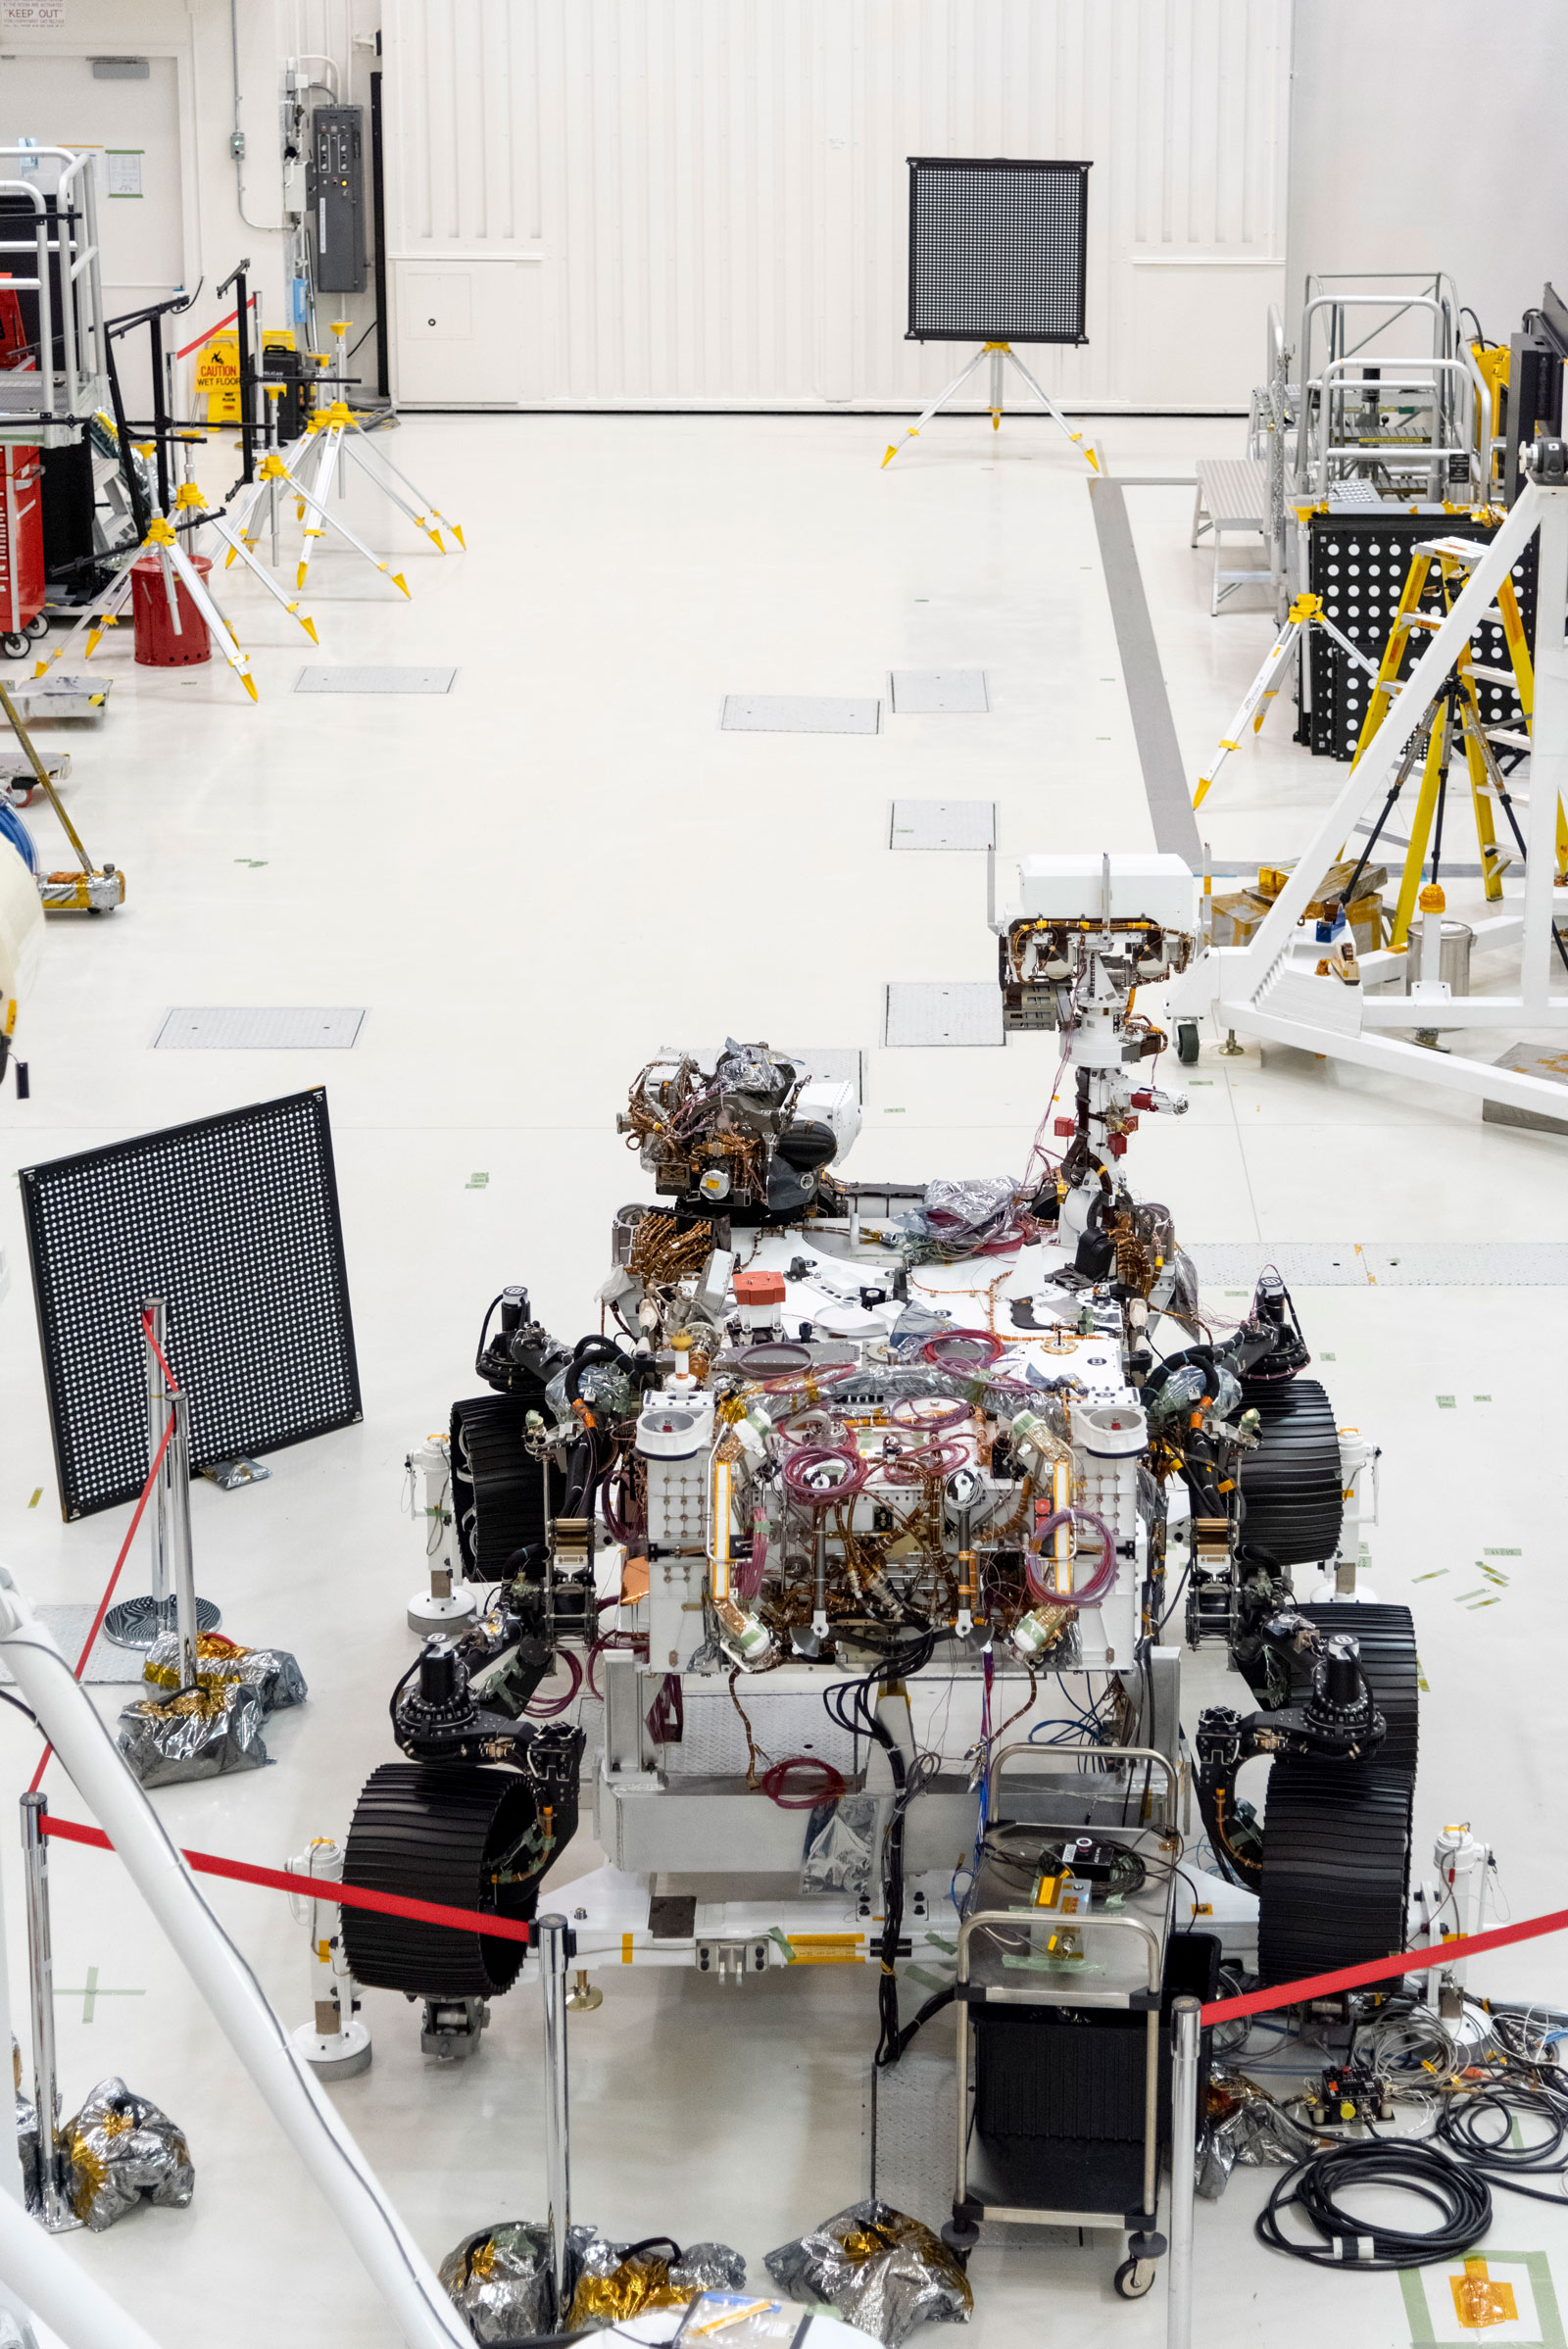 The Mars 2020 rover undergoes an "eye" exam after several cameras were installed. The rover carries everything from wide-angle landscape cameras to narrow-angle high-resolution zoom lens cameras. The image was taken on July 23, 2019, in the Spacecraft Assembly Facility's High Bay 1 at the Jet Propulsion Laboratory in Pasadena, California.